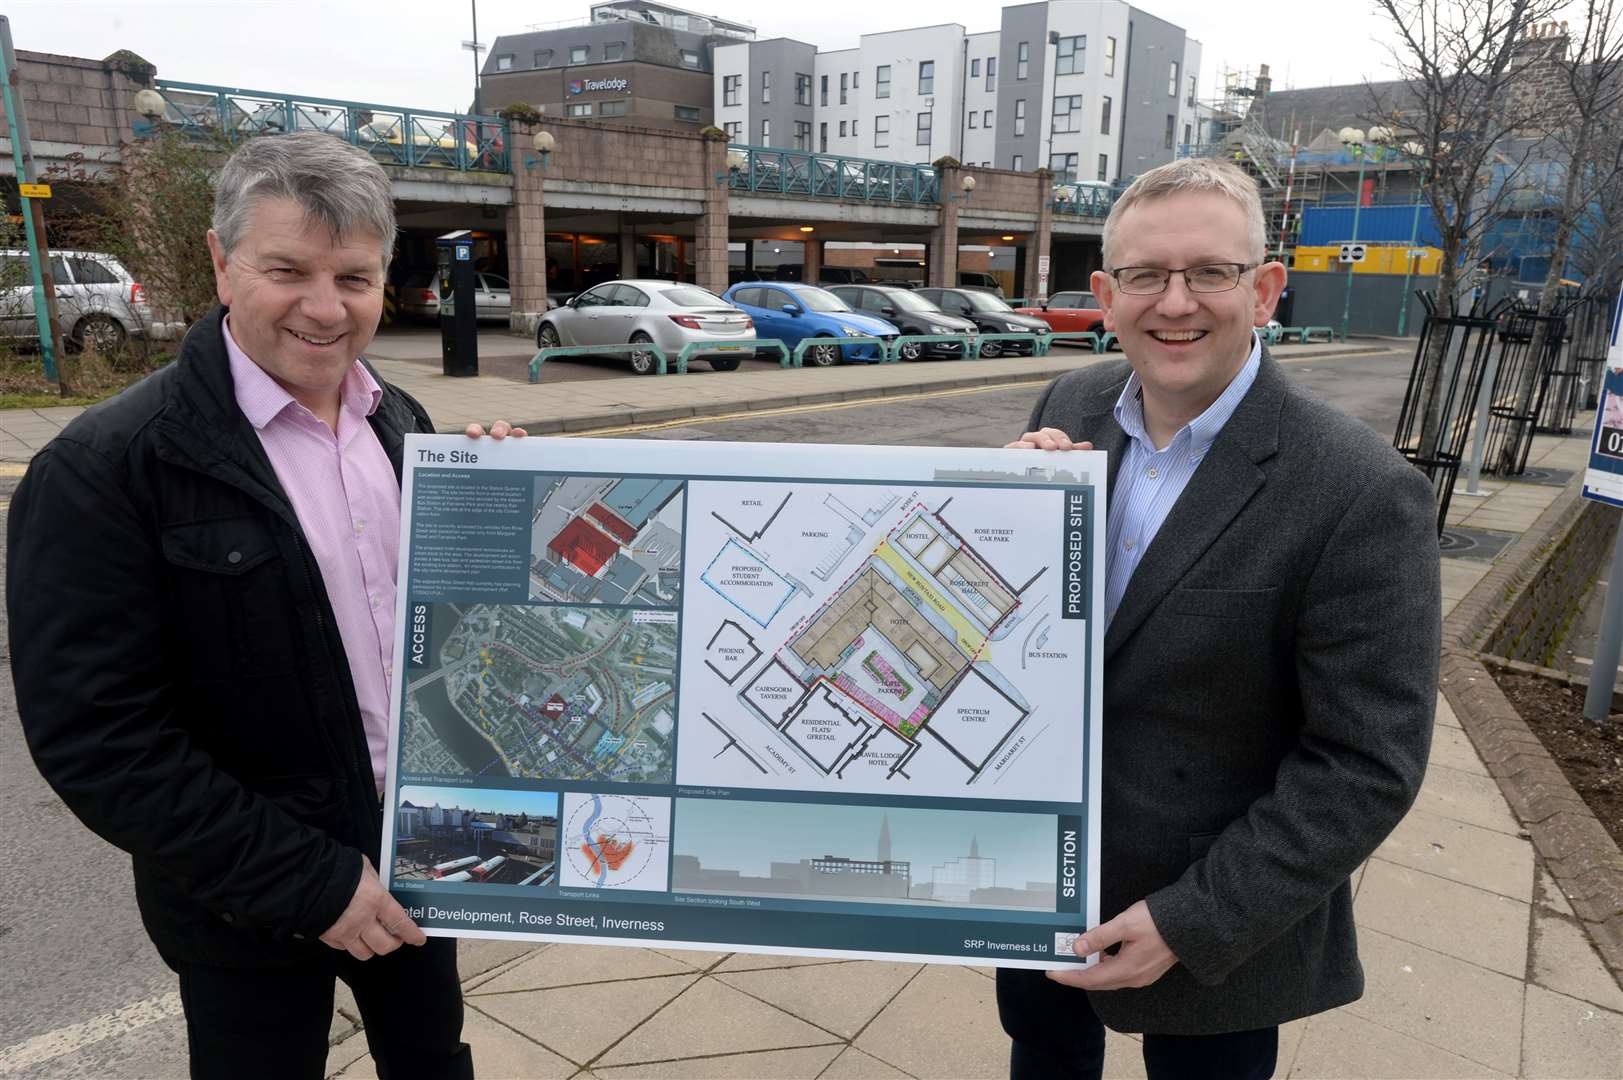 Hotel Development Rose Street..Directors of SRP Inverness Ltd Stuart McCaffer (left) and Stewart Campbell pictured at the site with plans for a proposed new hotel at Rose Street, Inverness....Hotel Development Rose Street.Picture: Gair Fraser. Image No. ..